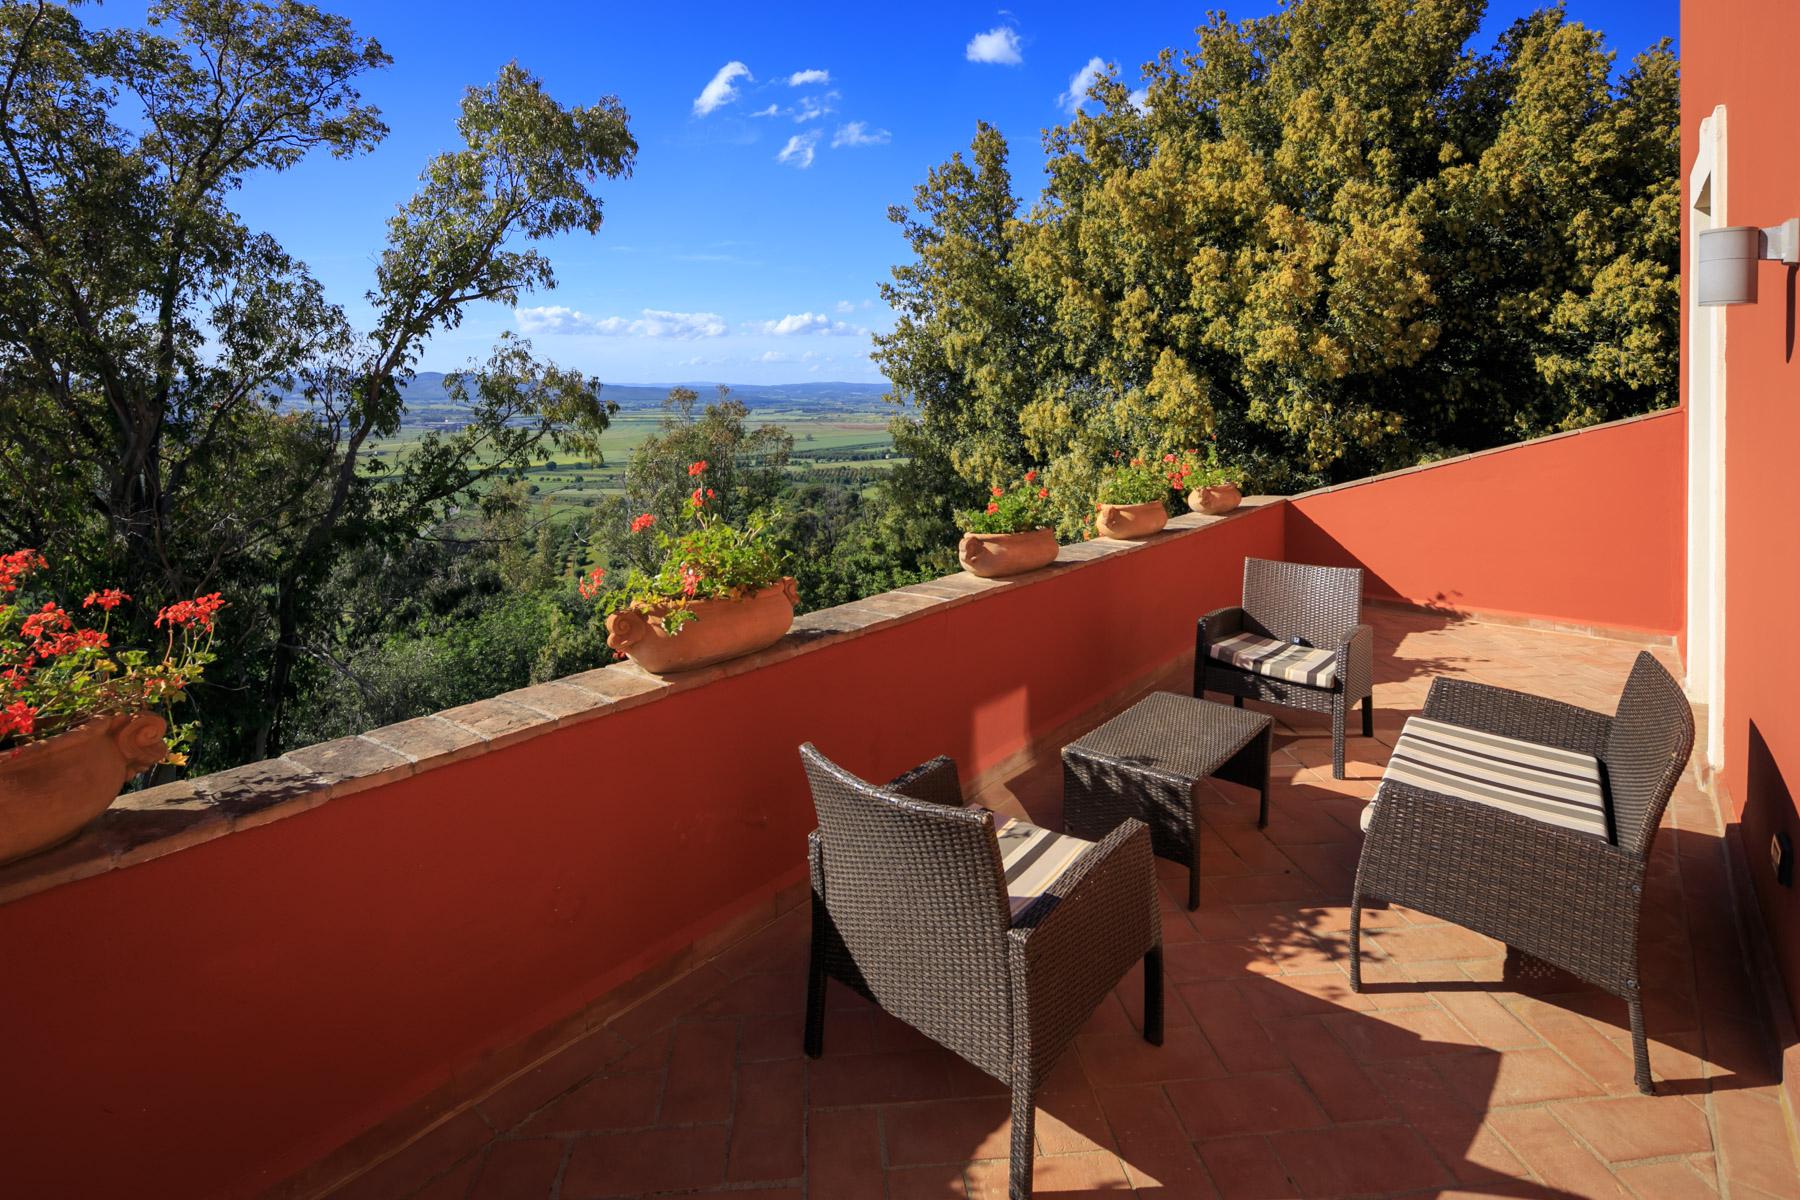 Historic Villa with stunning views over the Gulf of Scarlino - 30